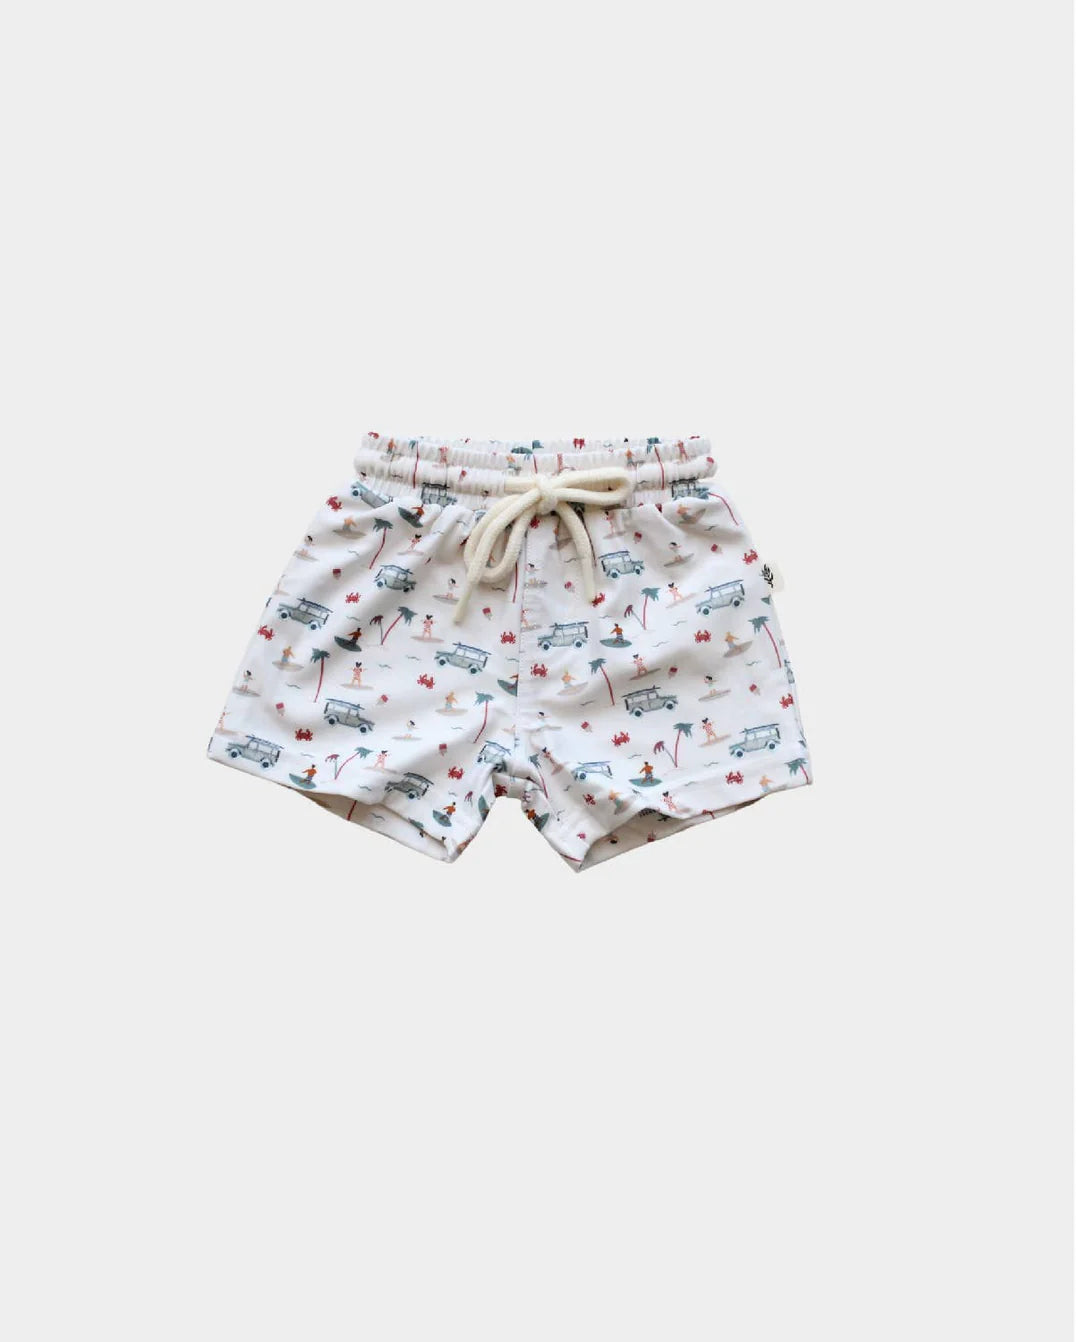 Babysprouts Swim Shorts in Surf